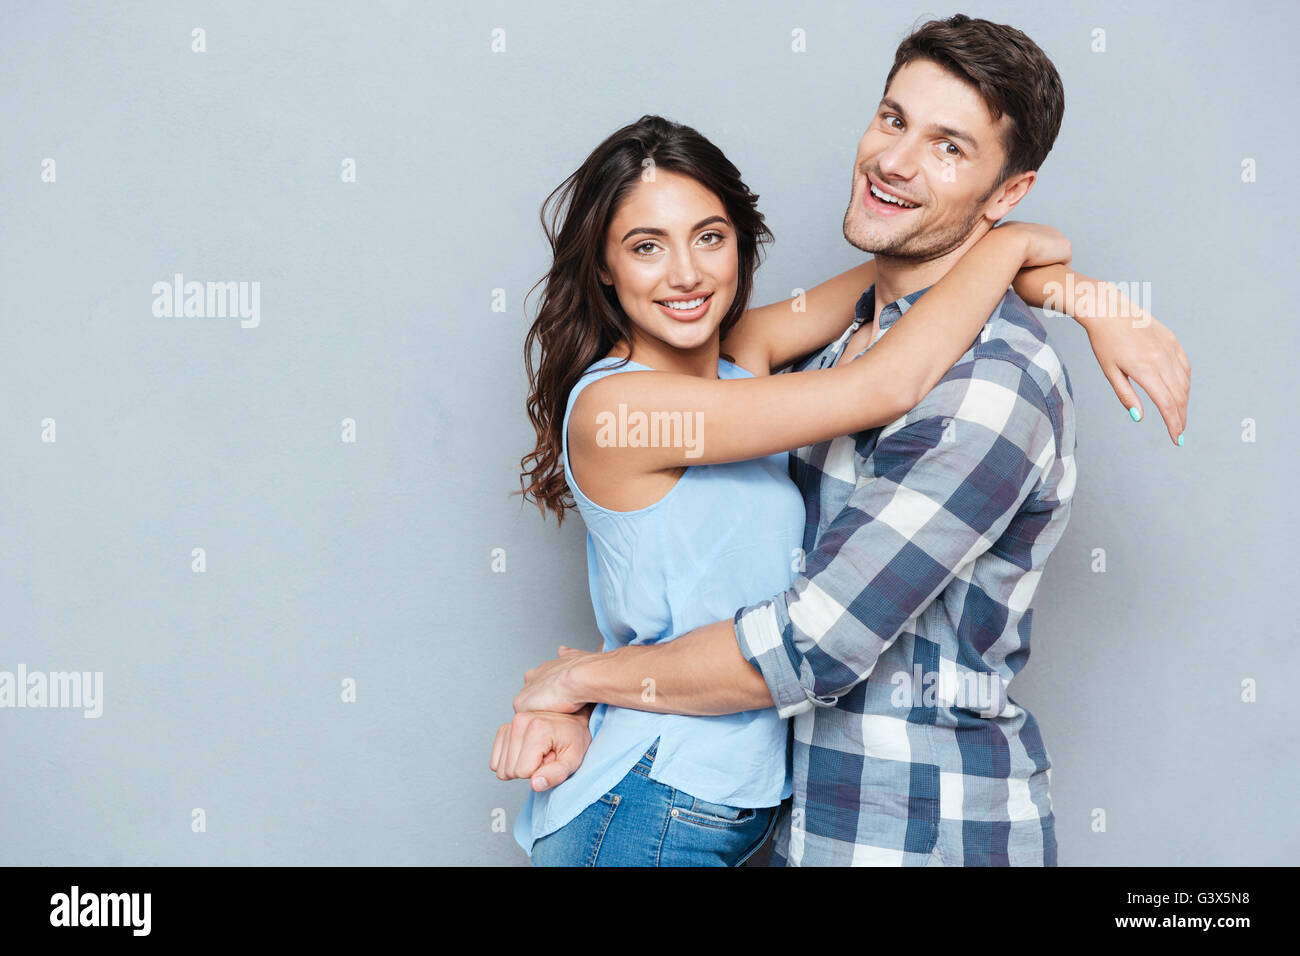 Casual young couple hugging each other and smiling at camera isolé sur fond gris Banque D'Images